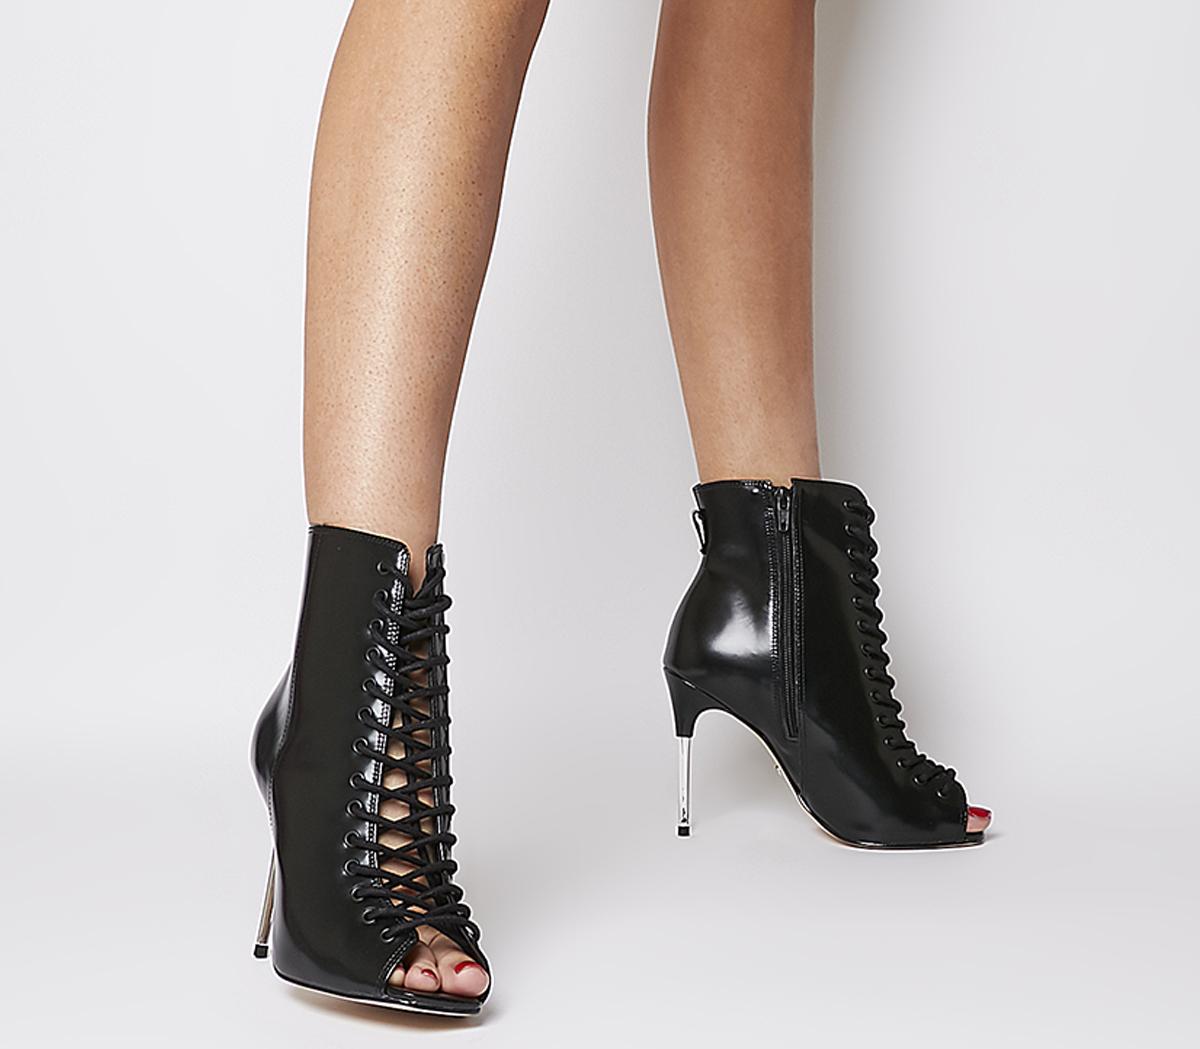 lace up peep toe boots